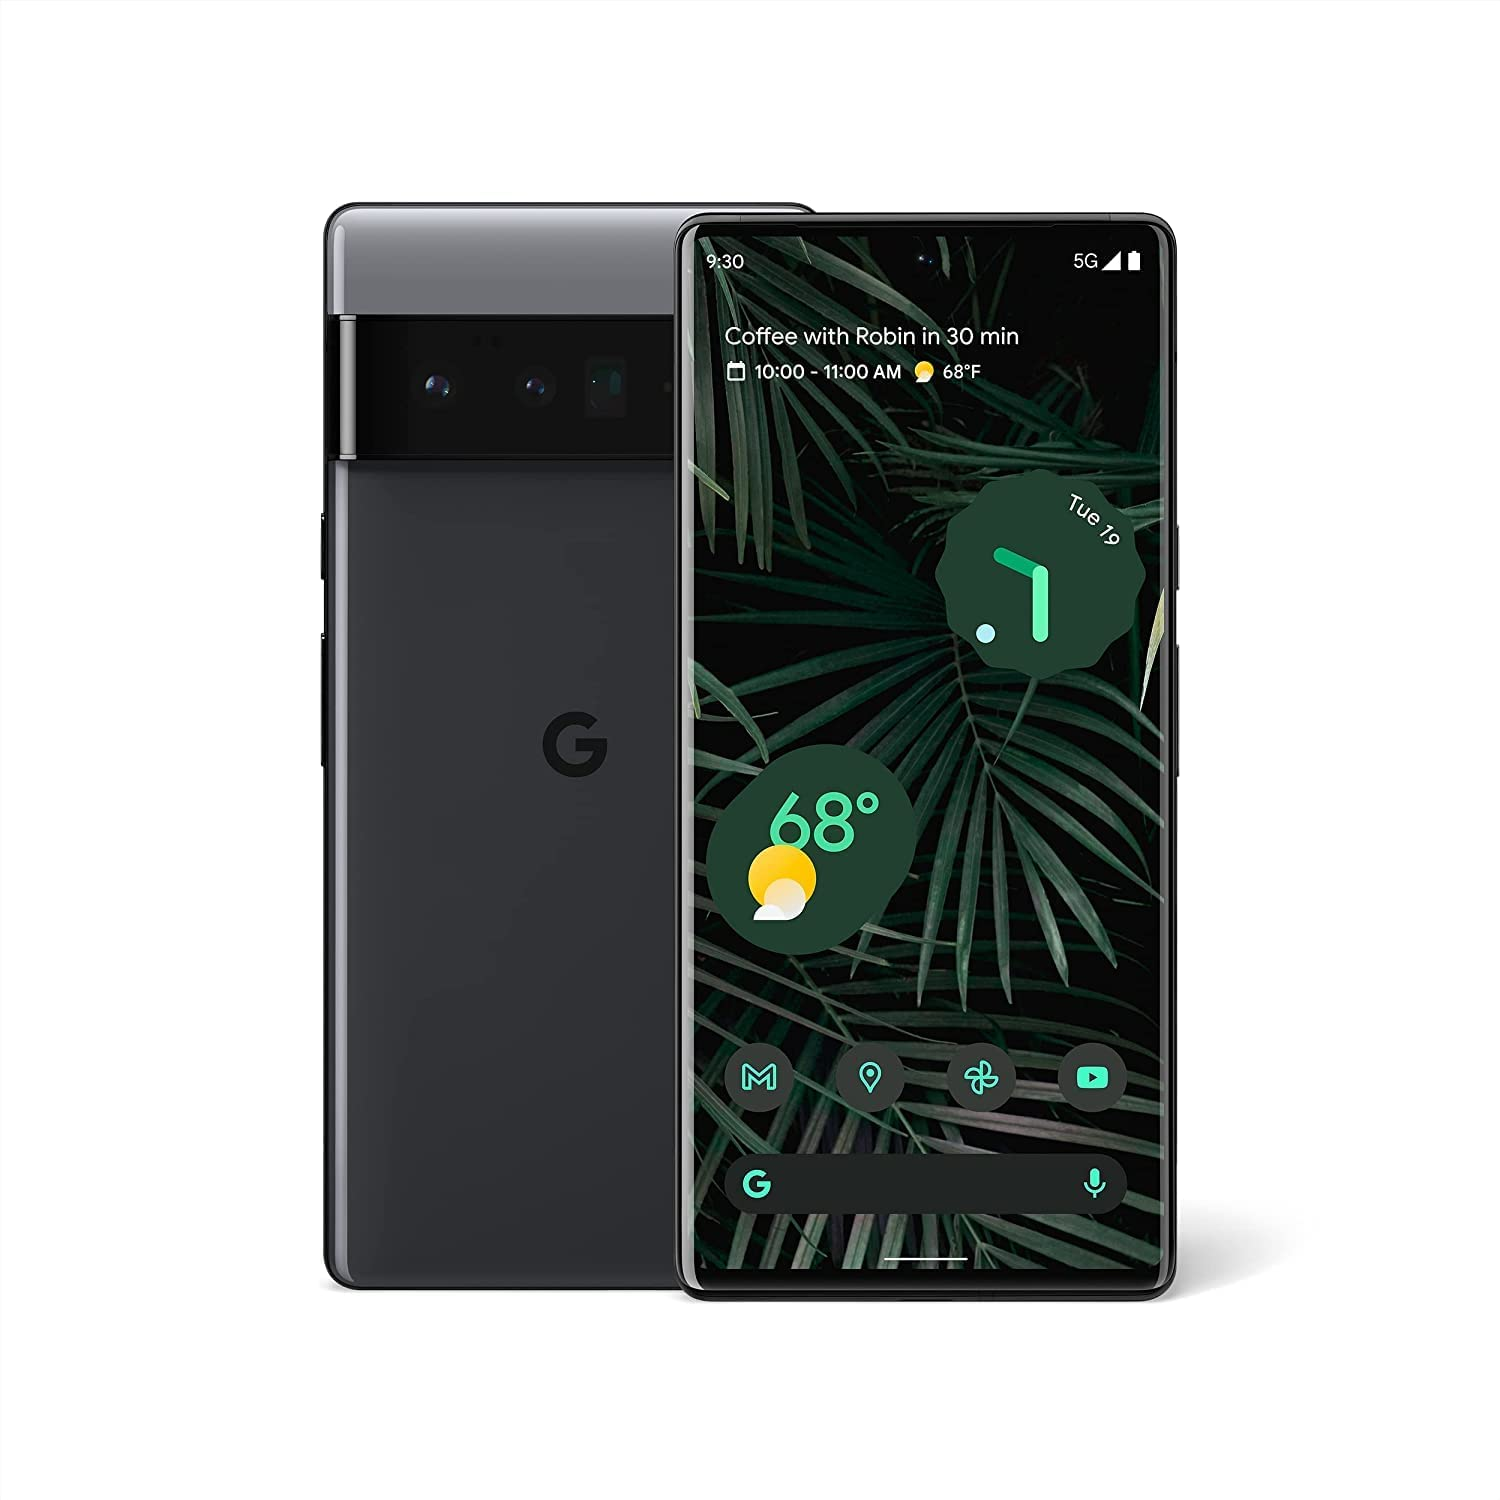 Amazon.com: Google Pixel 6 Pro - 5G Android Phone - Unlocked Smartphone with Advanced Pixel Camera and Telephoto Lens - 256GB - Stormy Black : $949.75